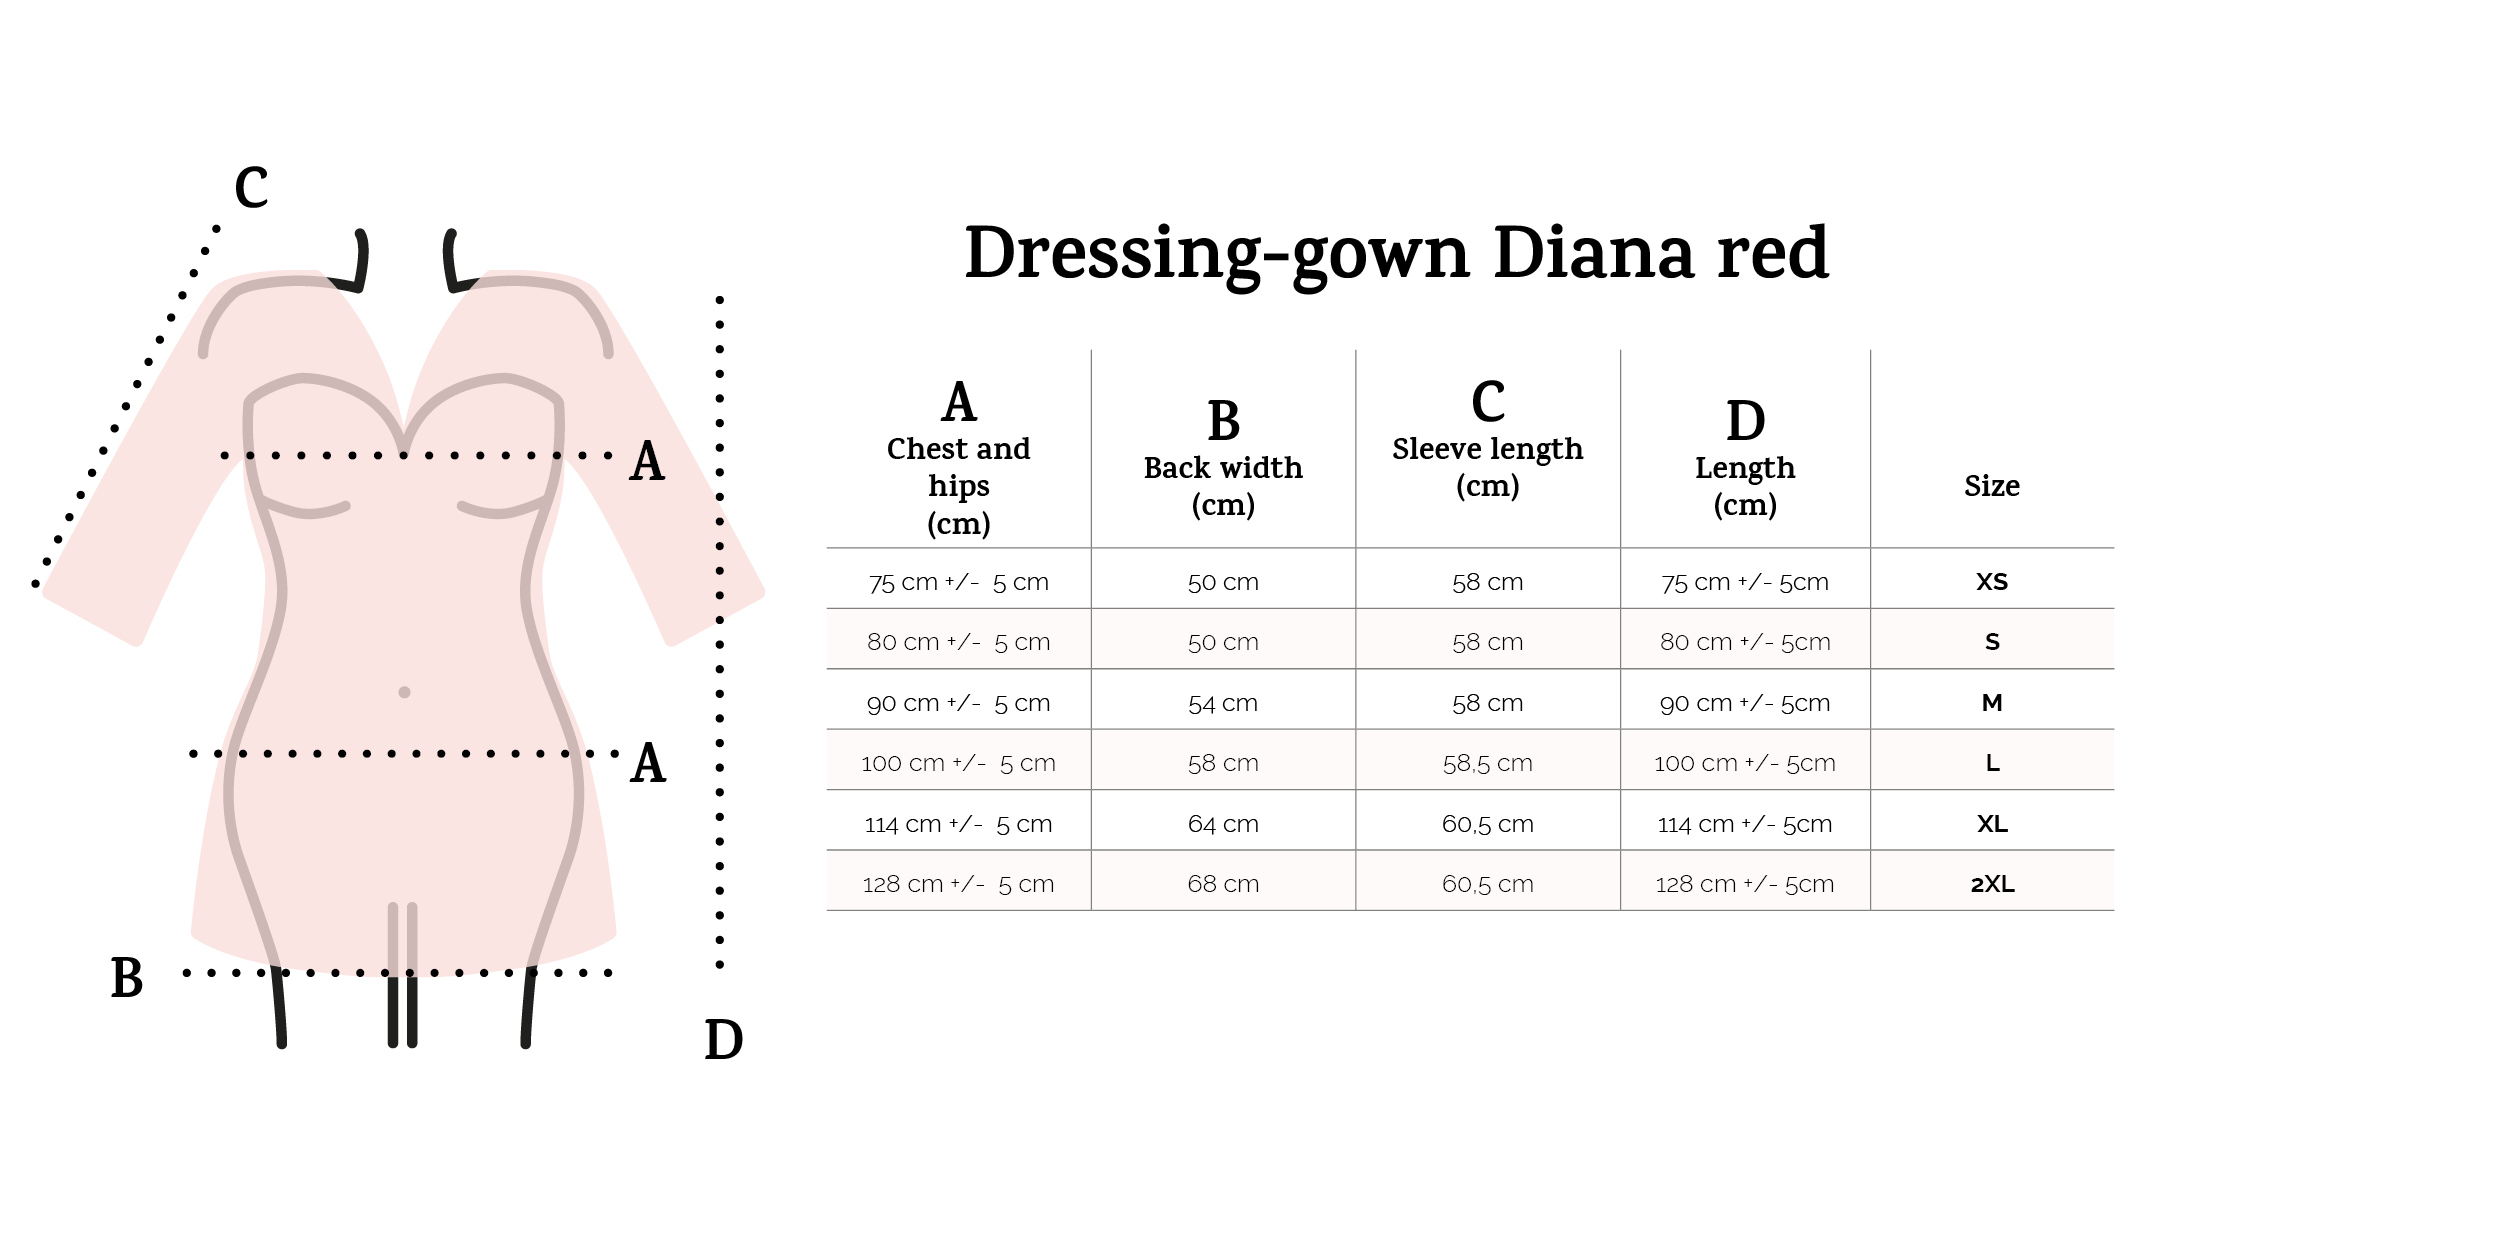 Dressing-gown Diana red